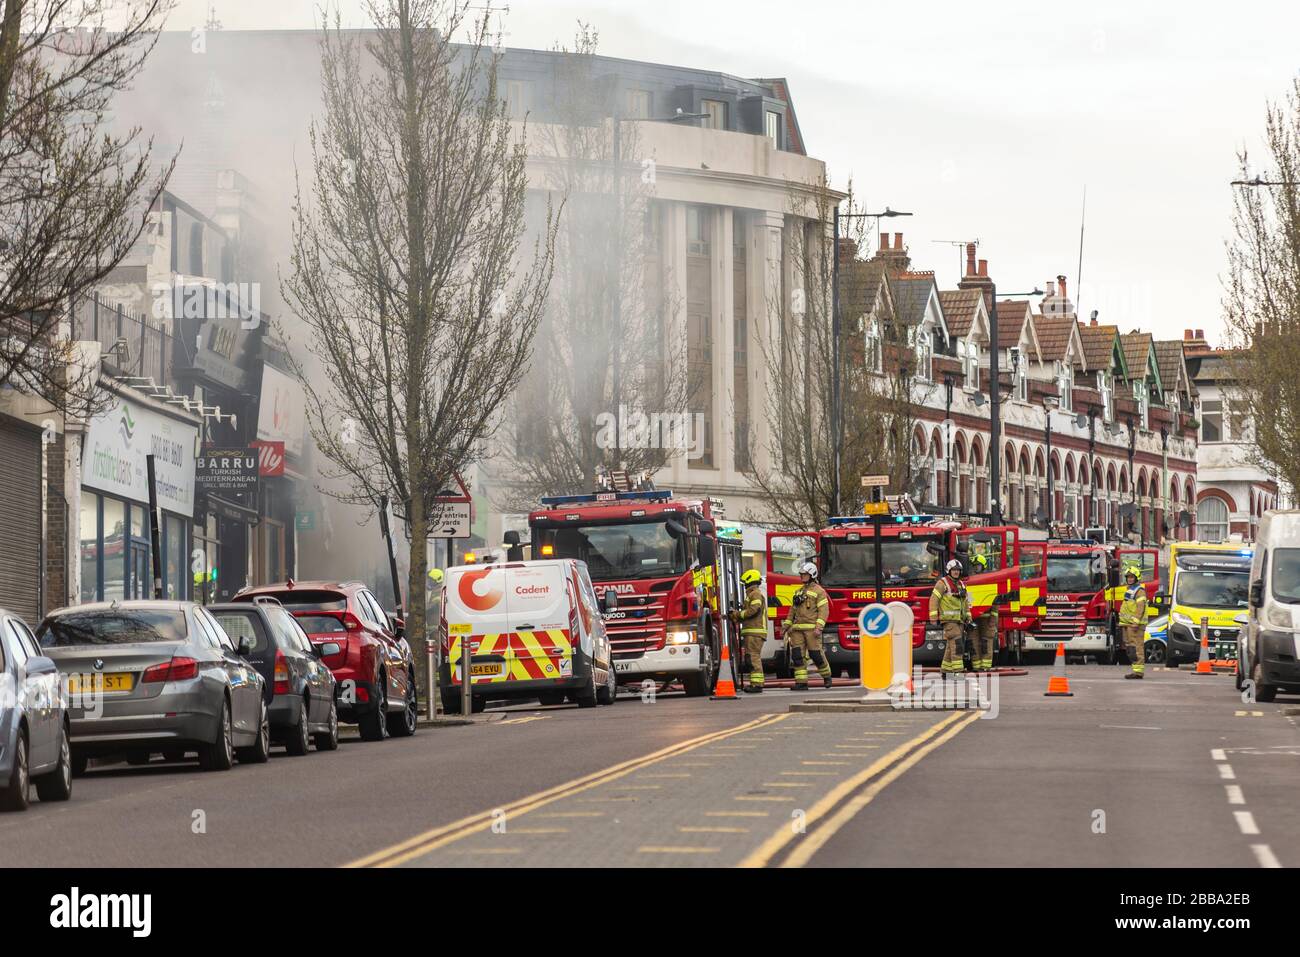 Fire Service dealing with a fire next to Sainsbury's supermarket in Westcliff on Sea, Essex, UK during COVID-19 lockdown. Fire engines and firefighter Stock Photo